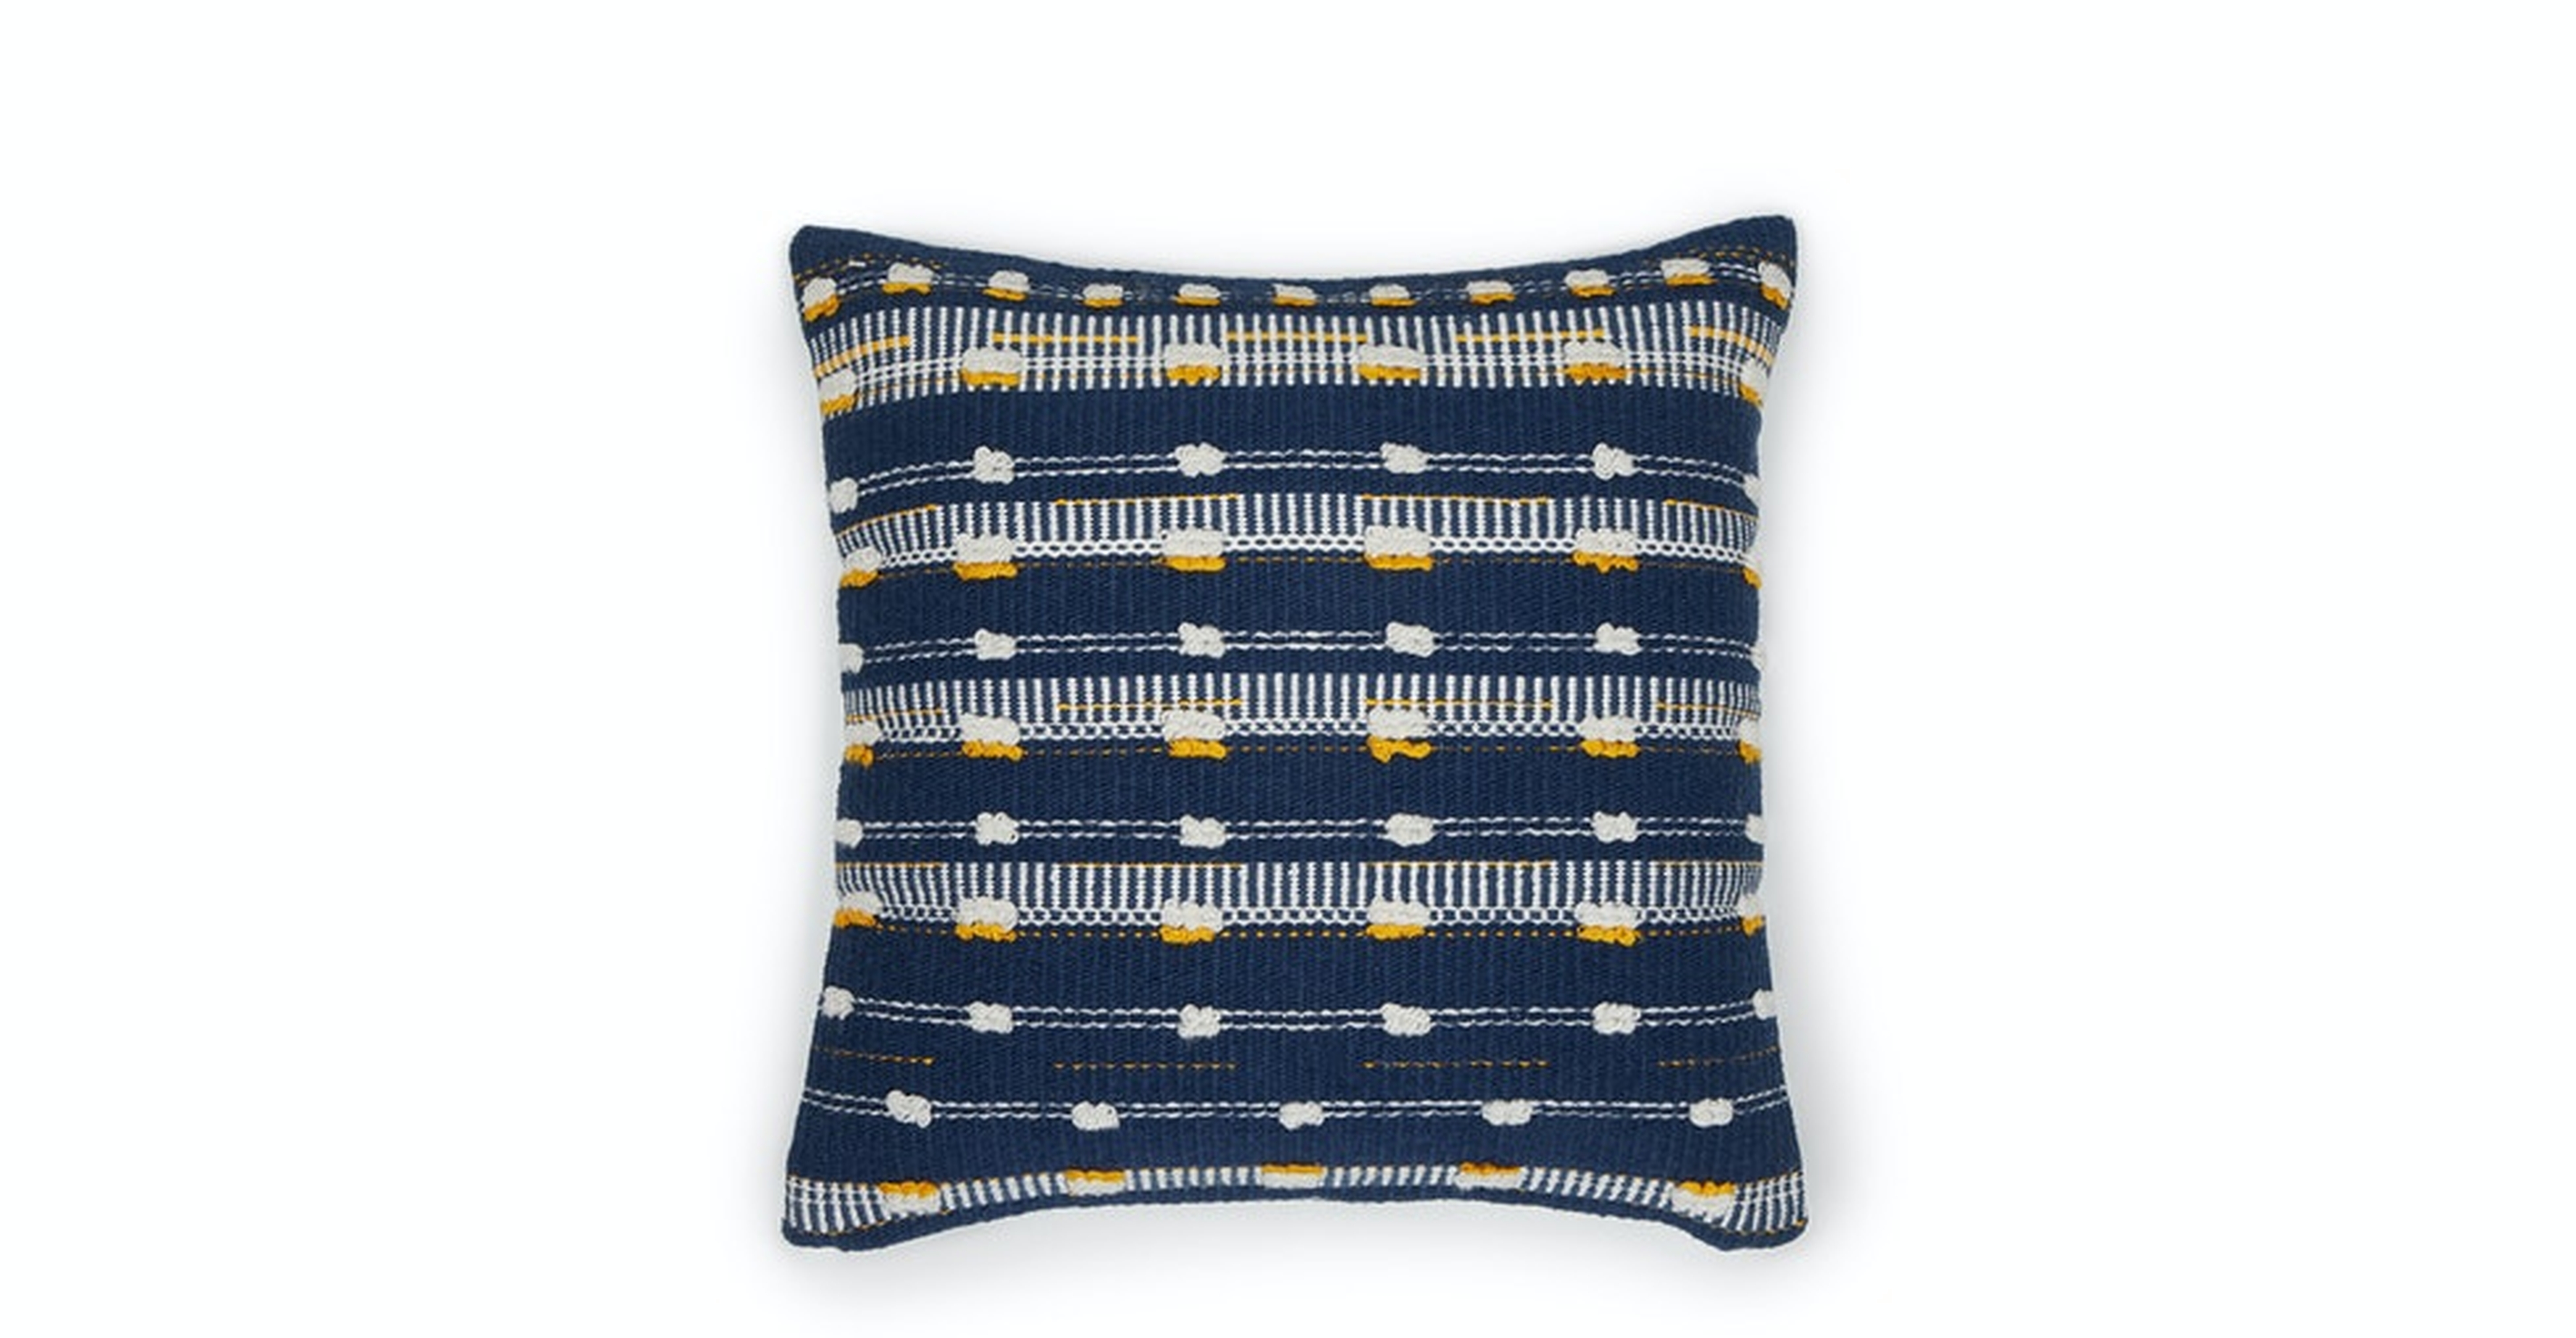 Jema Oxford Navy Pillow - Article